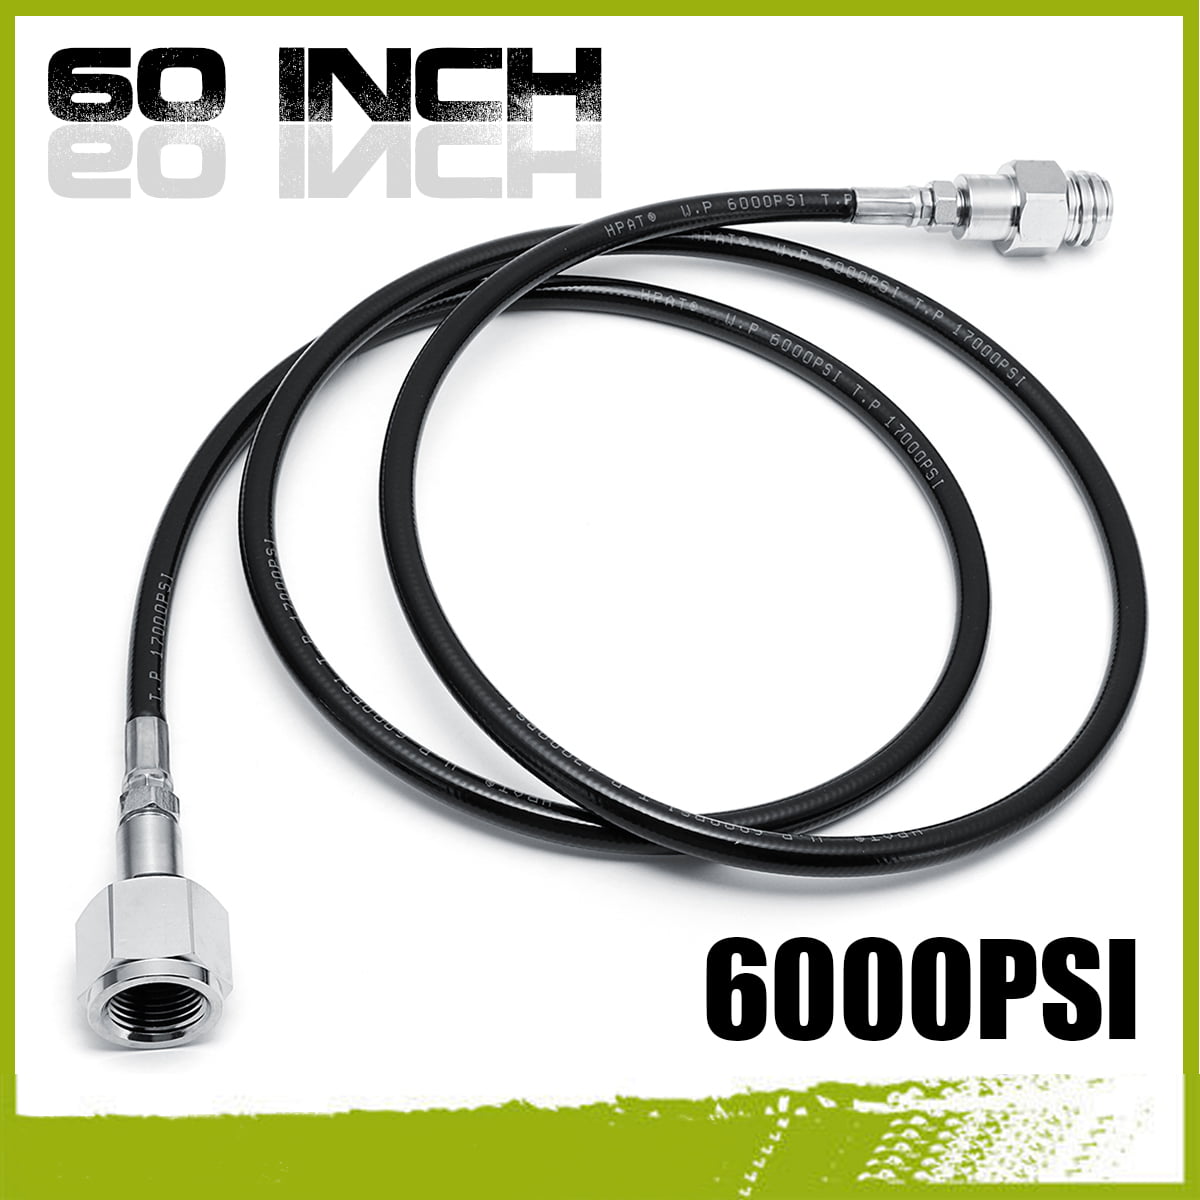 Co2 Tank Adapter & Hose Kit CGA320 Connector for SodaStream Sparking Water Maker